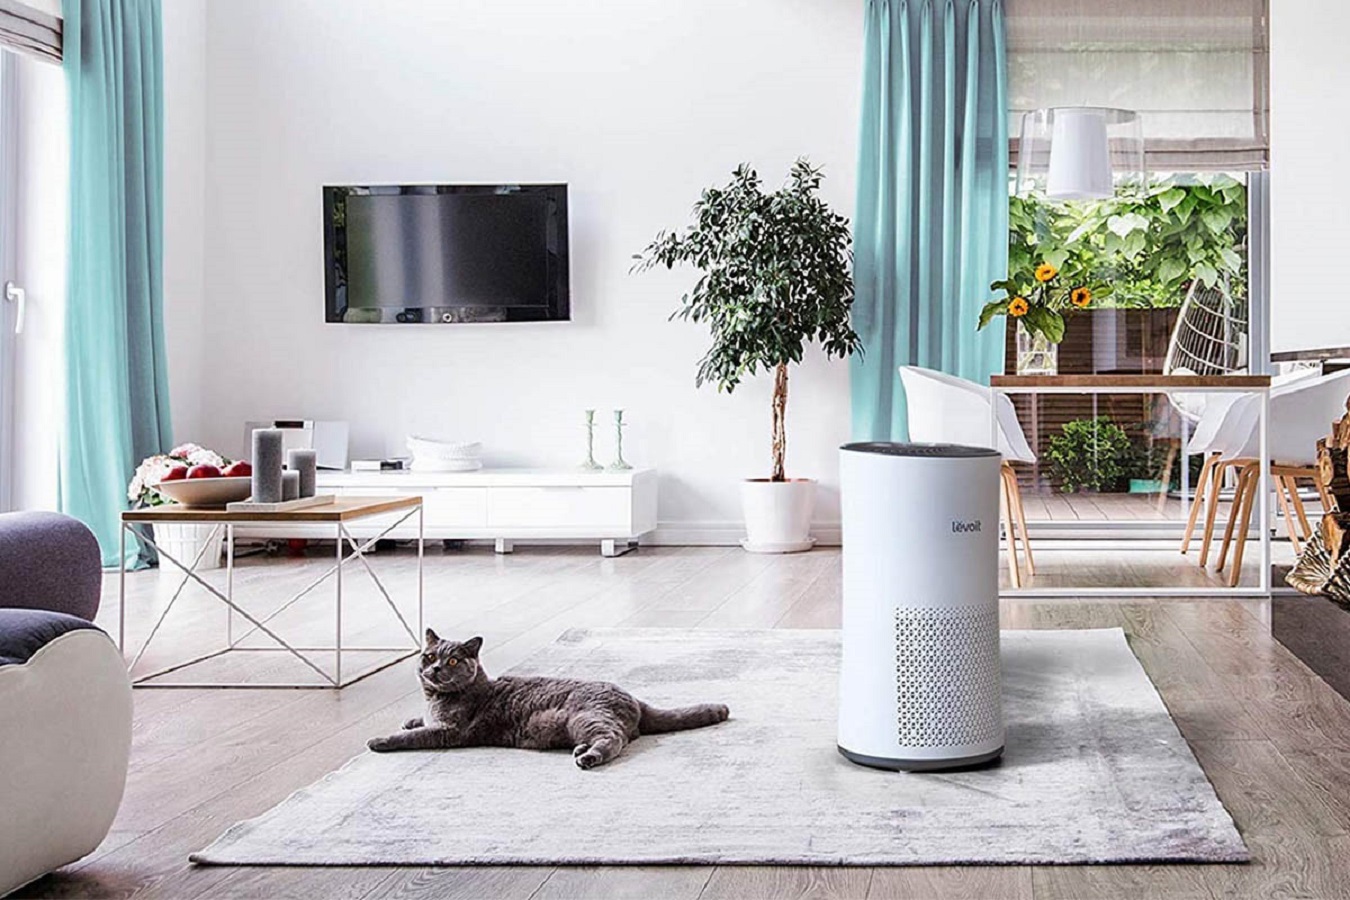 3 Top Rated Best Air Purifiers for May 2022 | Check Prices